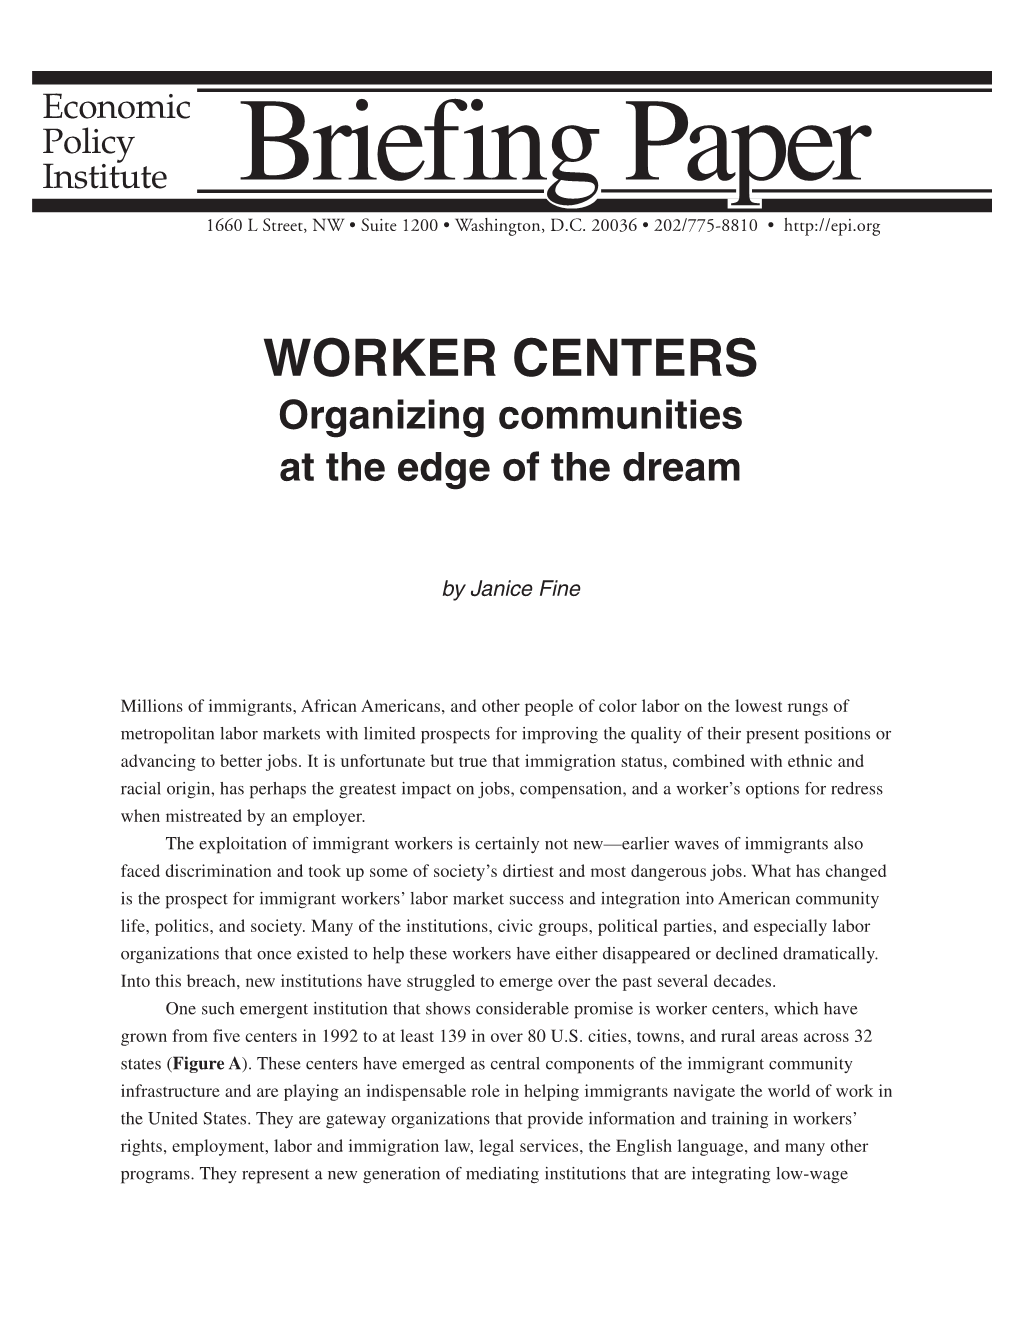 WORKER CENTERS Organizing Communities at the Edge of the Dream